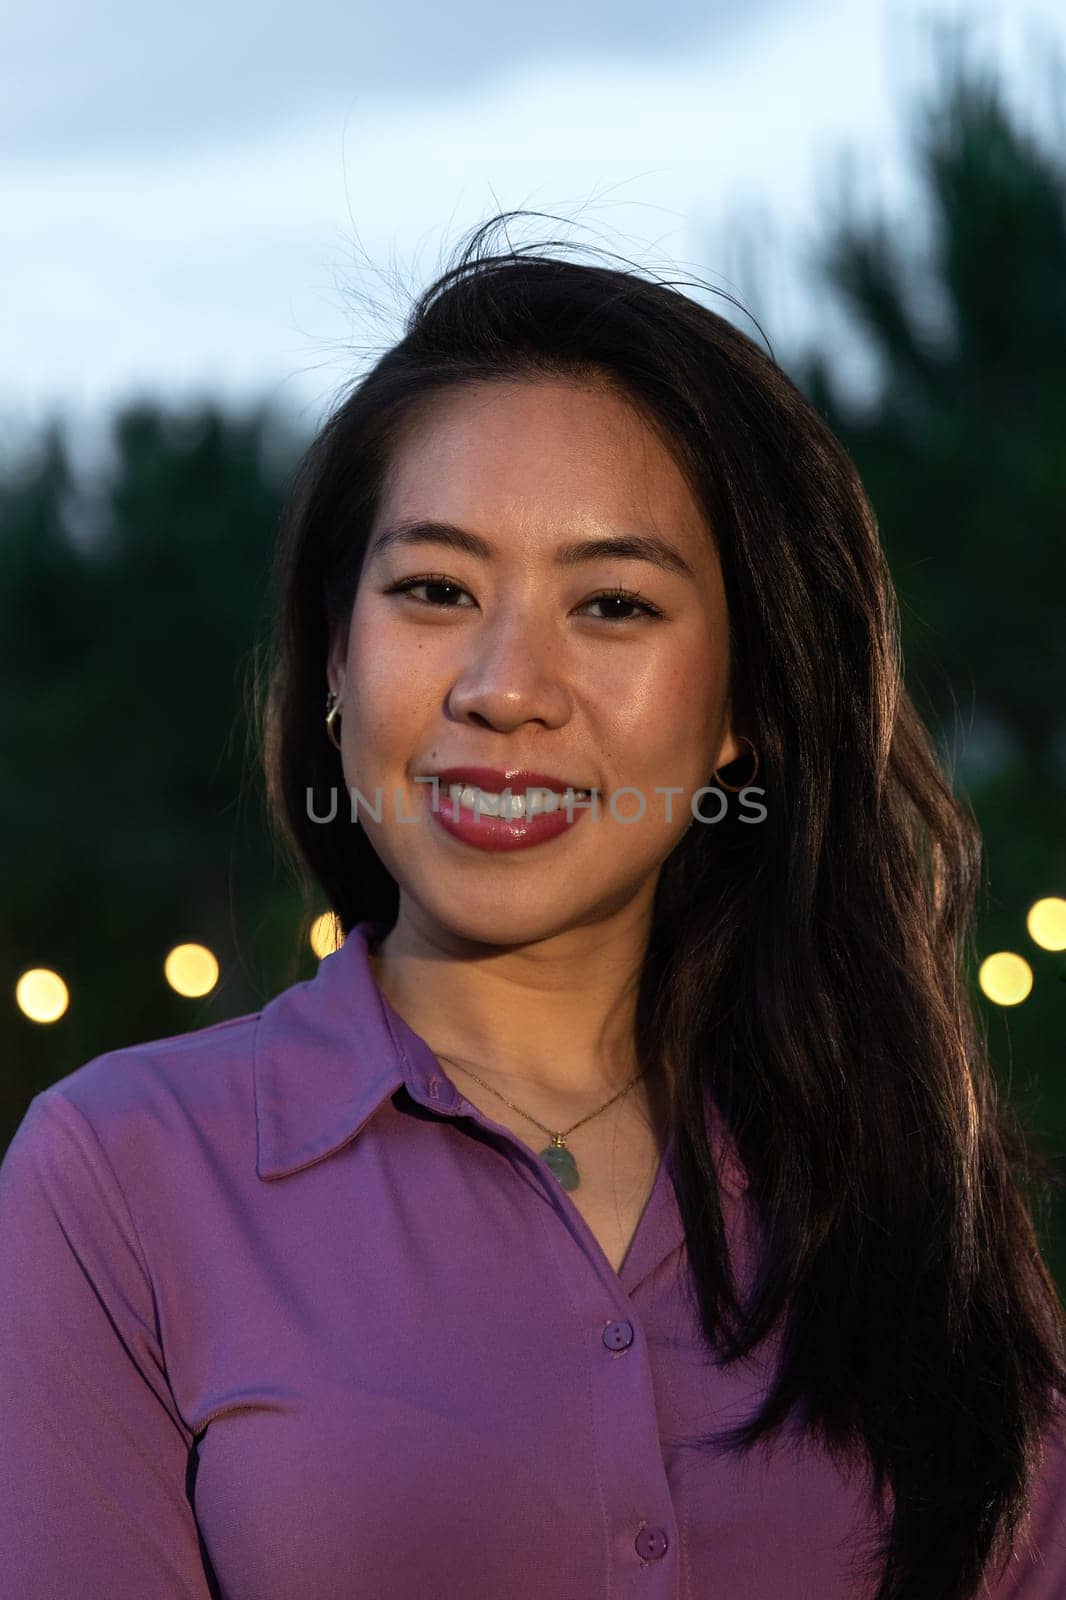 Vertical headshot of young smiling asian woman at sunset. by Hoverstock